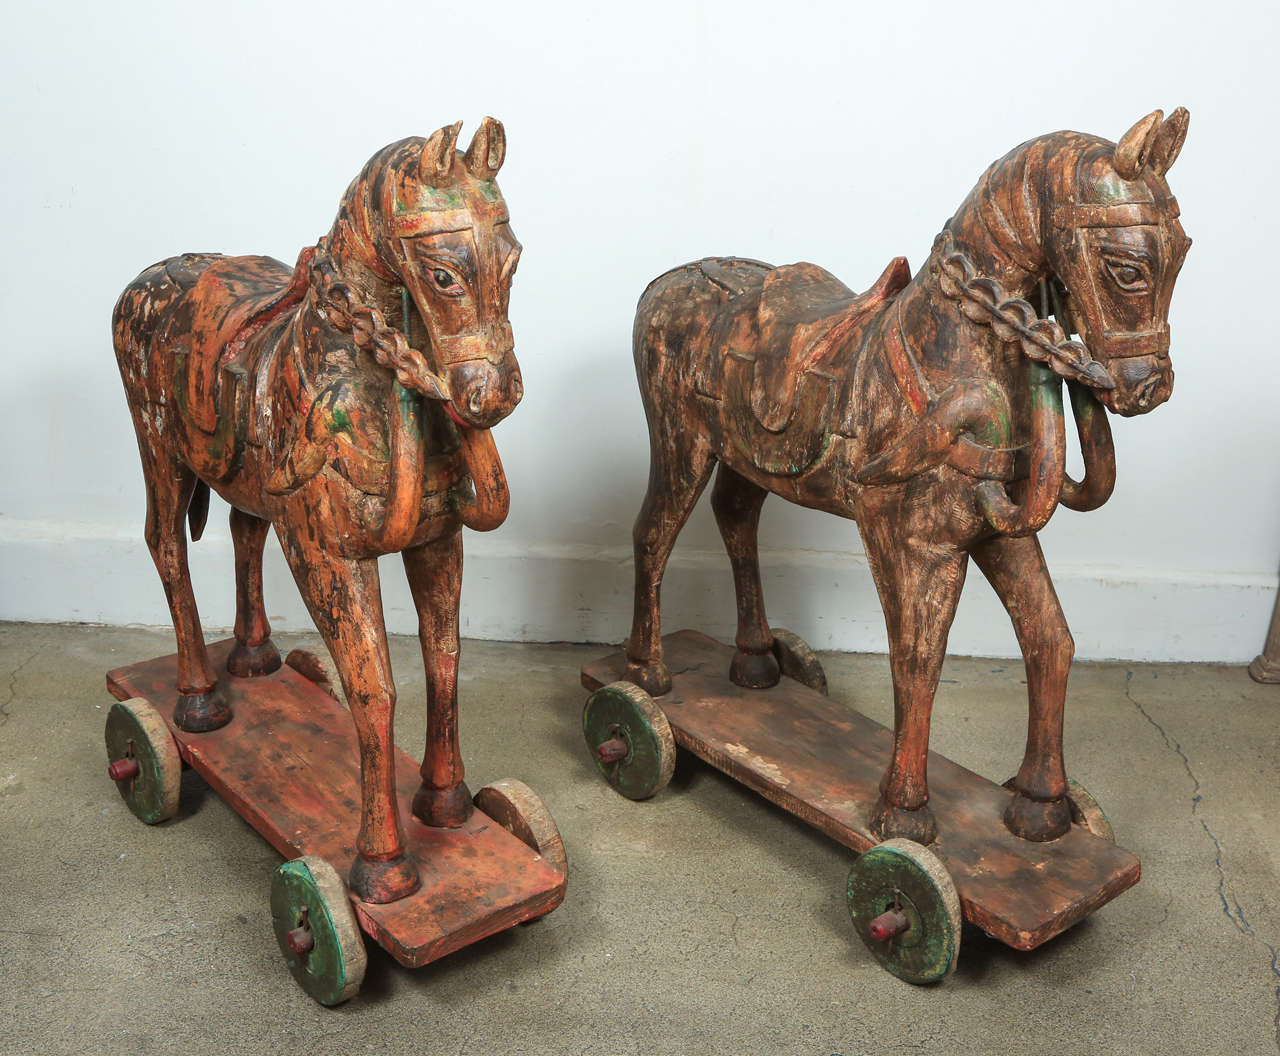 Pair of hand-carved wooden Anglo-Indian temple horses with poly-chrome decorated sitting a top of a wheeled board.
The two horses are almost the same size, but different designs, carving and colors, they are not matching.
Very nice handicraft,